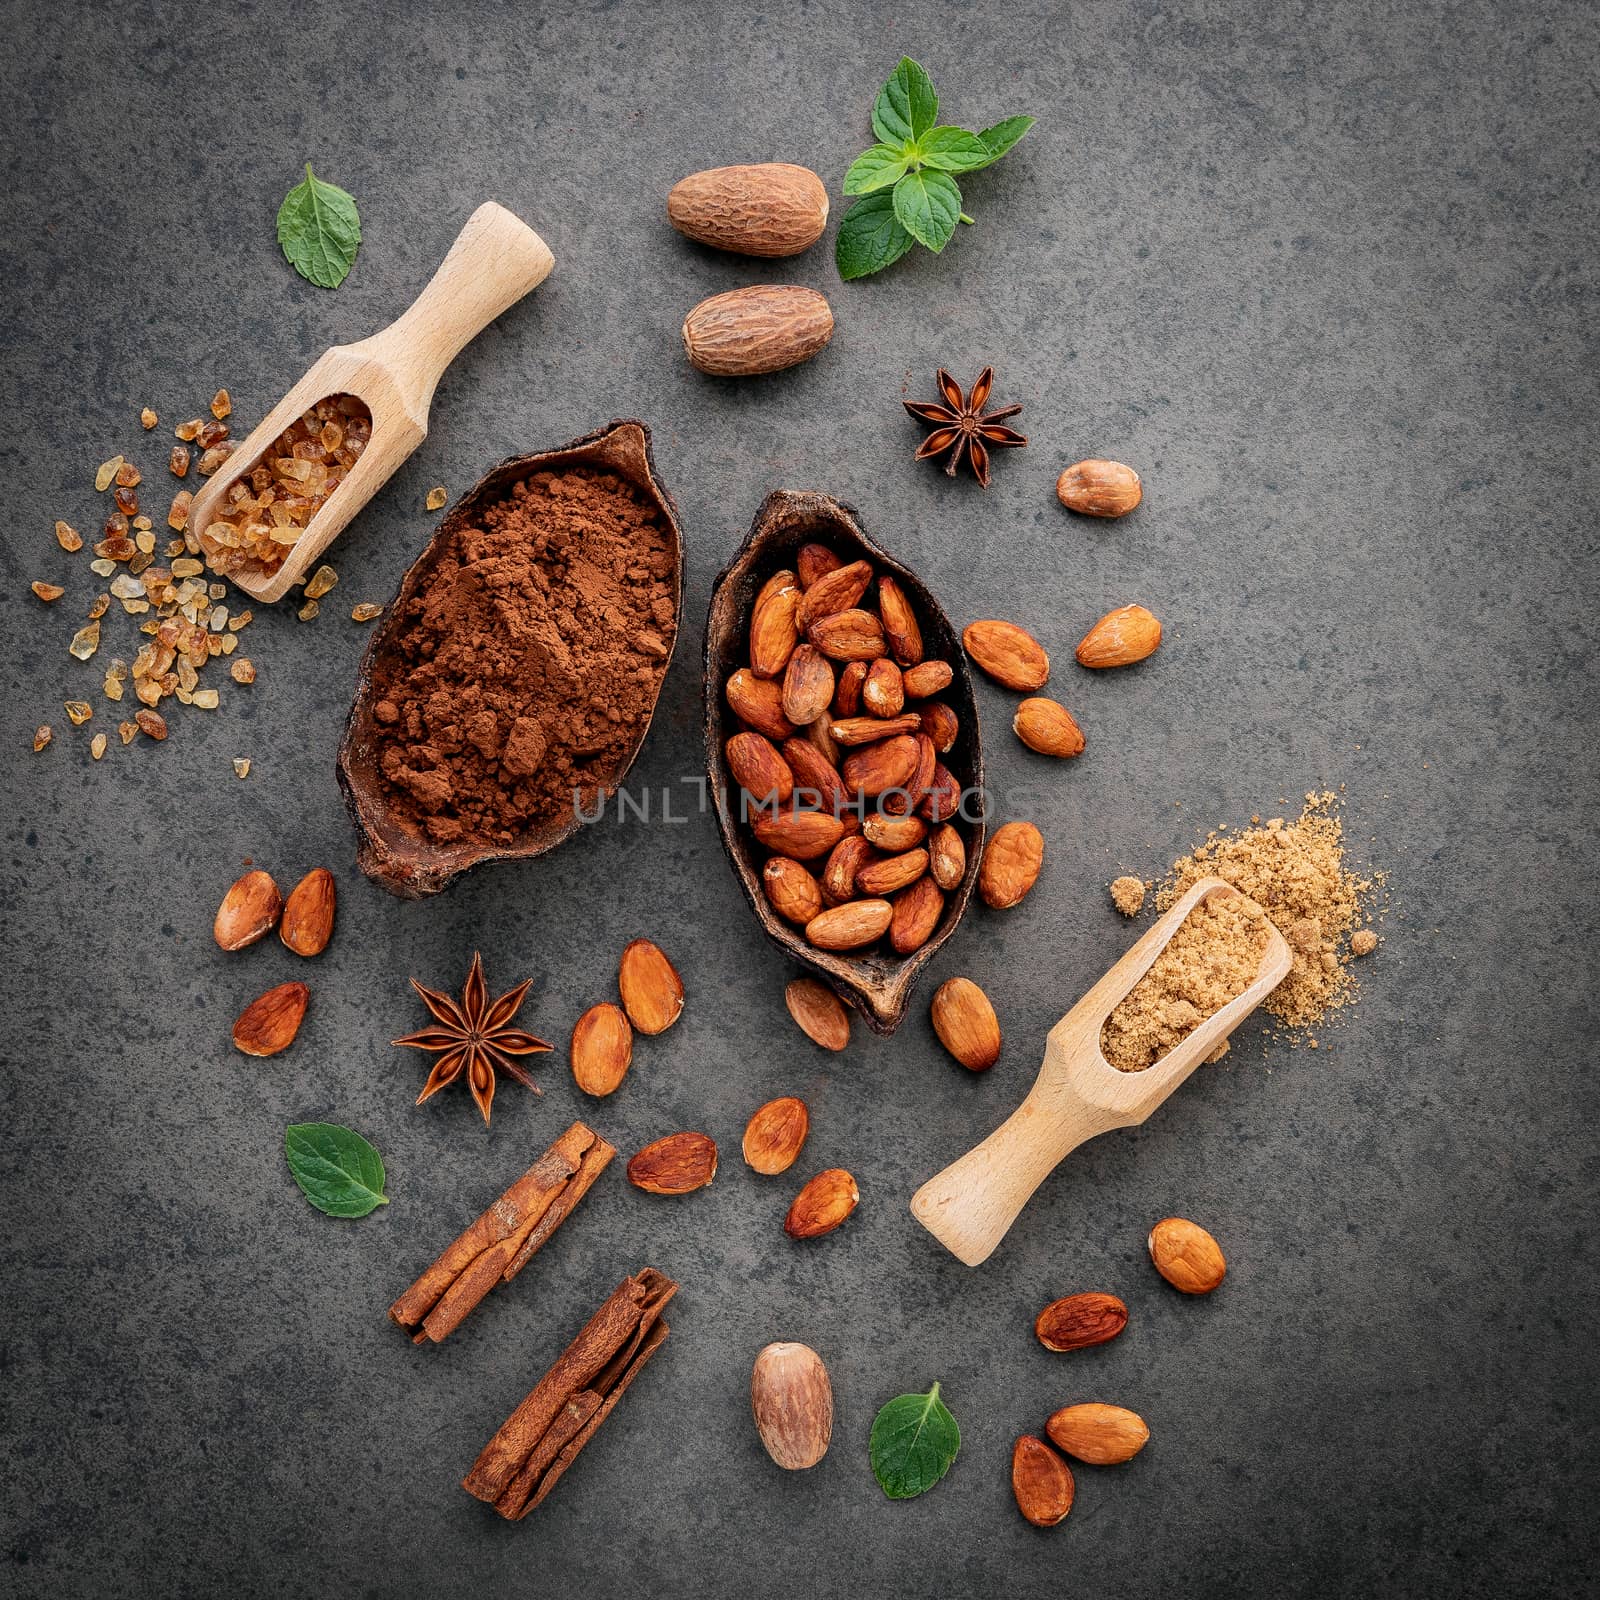 Cocoa powder and cacao beans on stone background. by kerdkanno